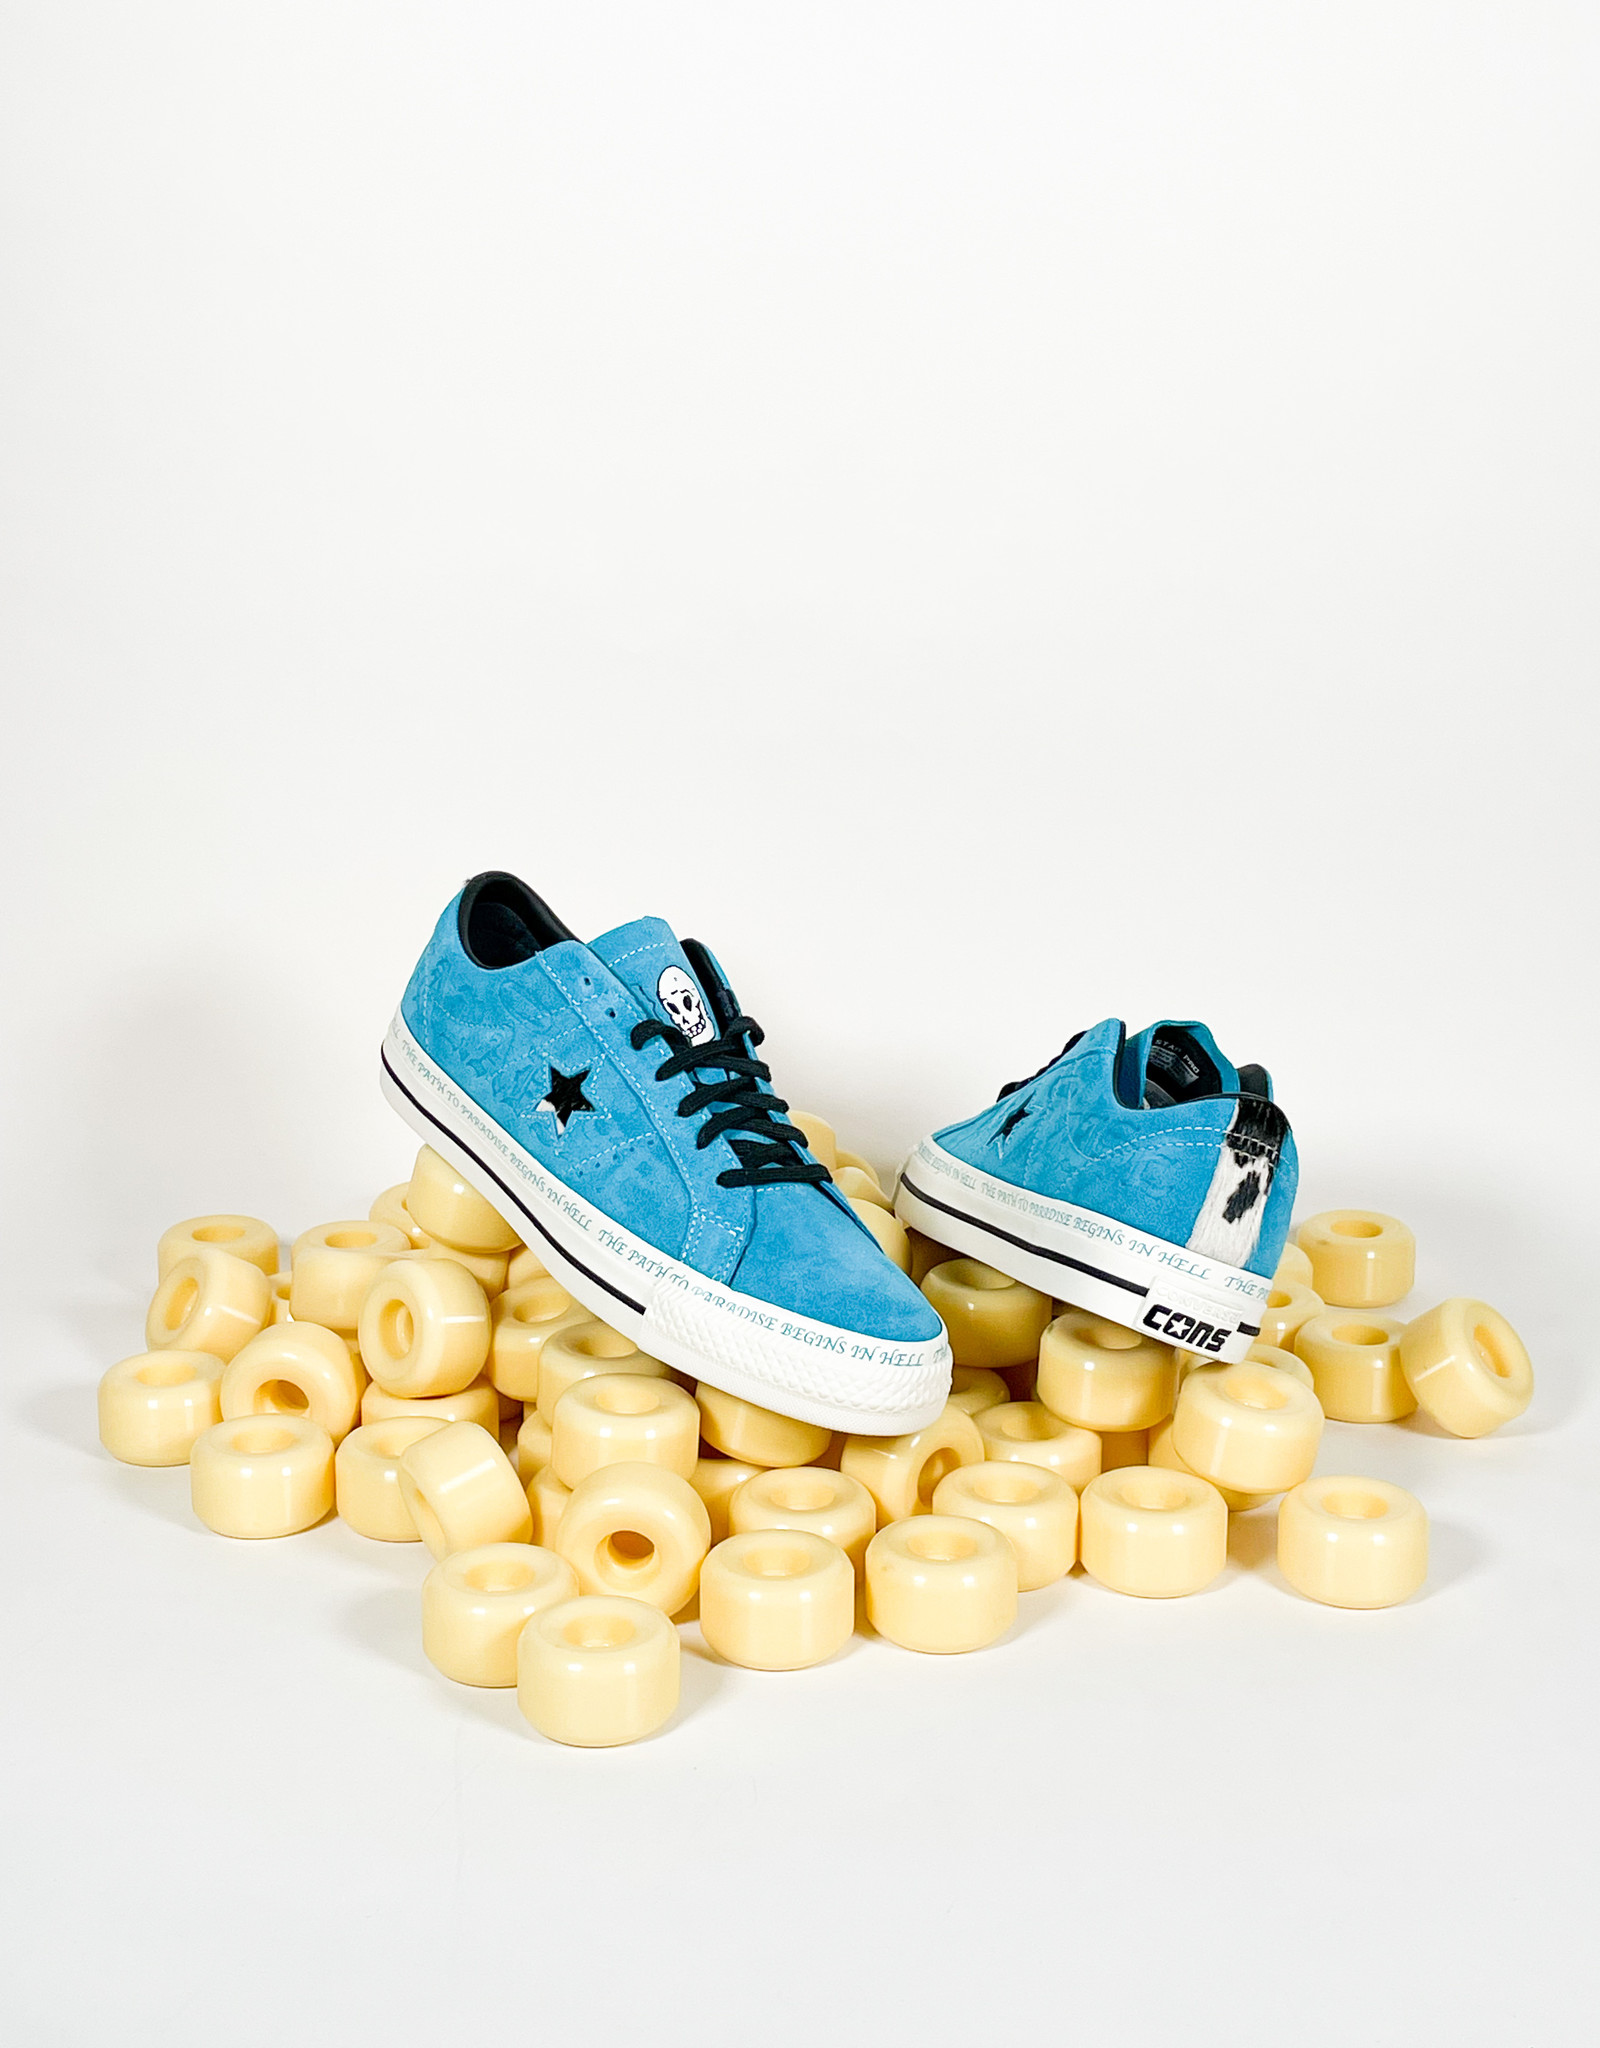 CONVERSE CONS ONE STAR PRO OX PARADISE - RAPID TEAL/BLACK/EGRET